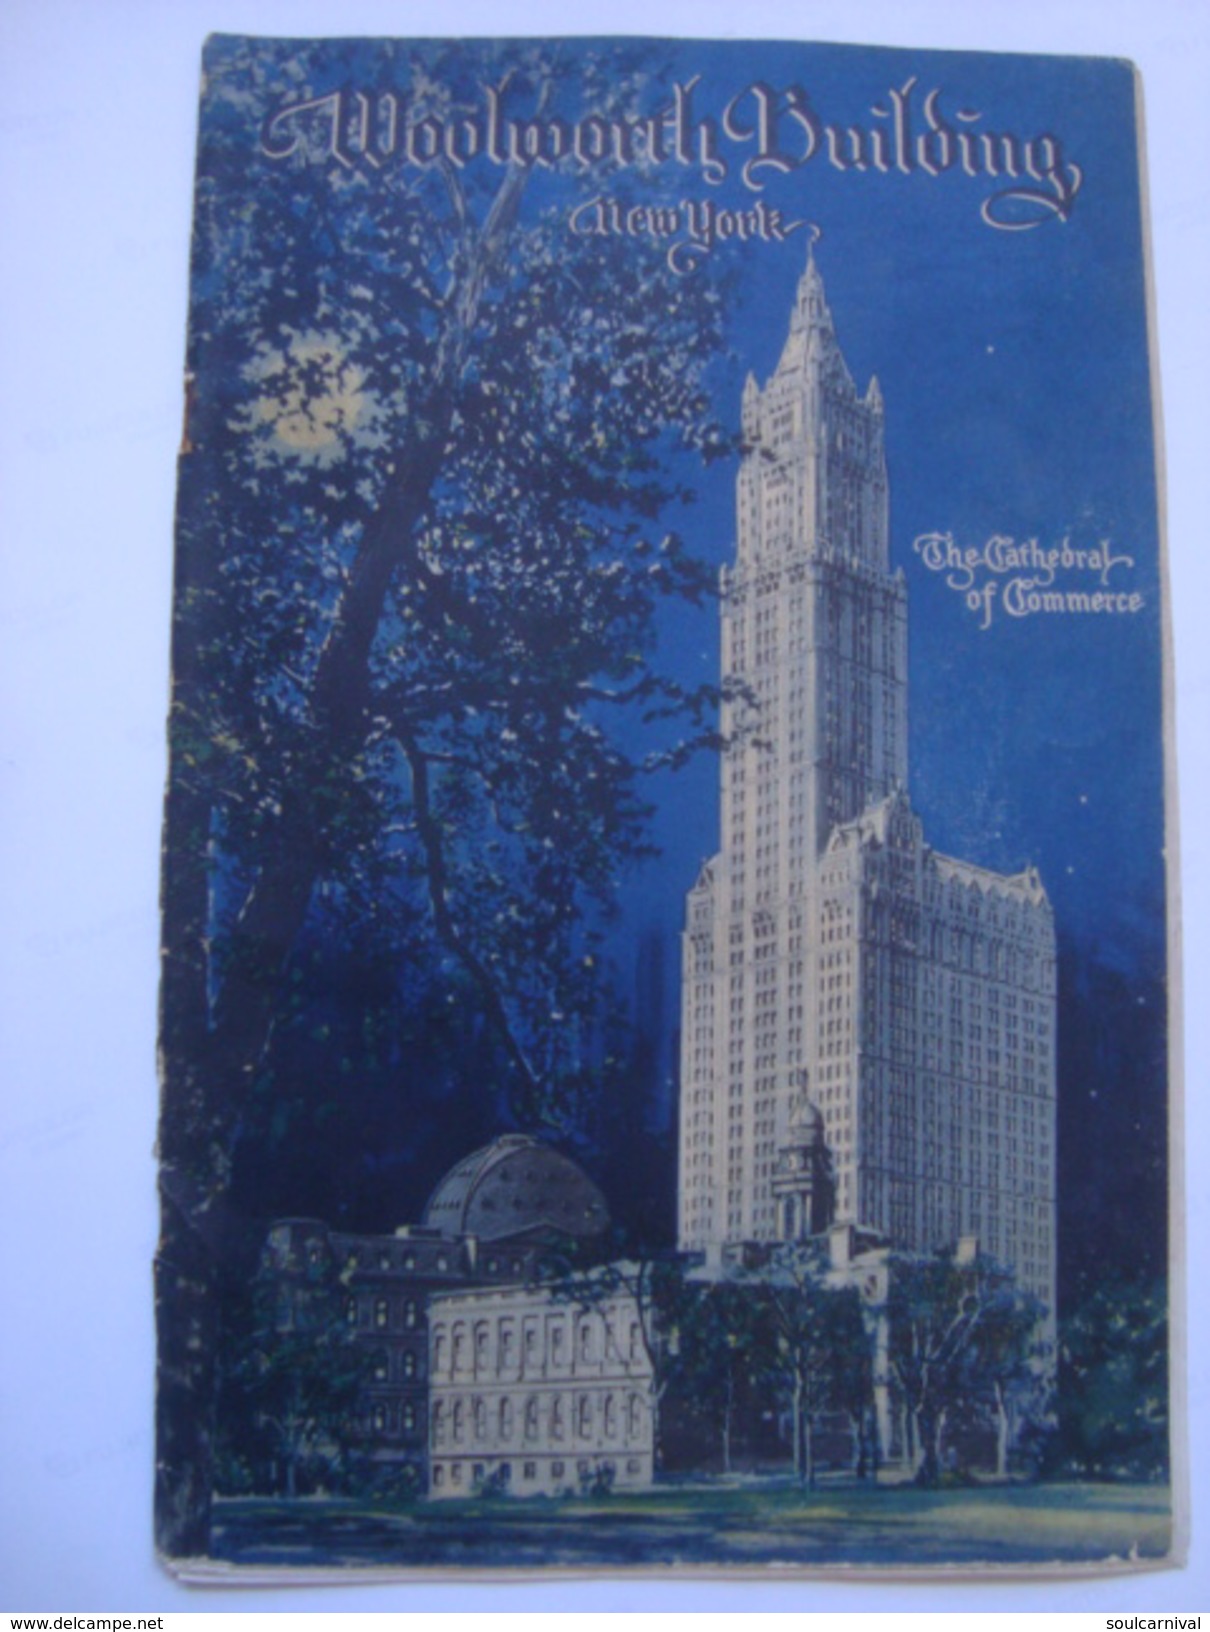 WOOLWORTH BUILDING. NEW YORK. THE CATHEDRAL OF COMMERCE - USA 1929. 26 PAGES B/W PHOTOS - Architektur